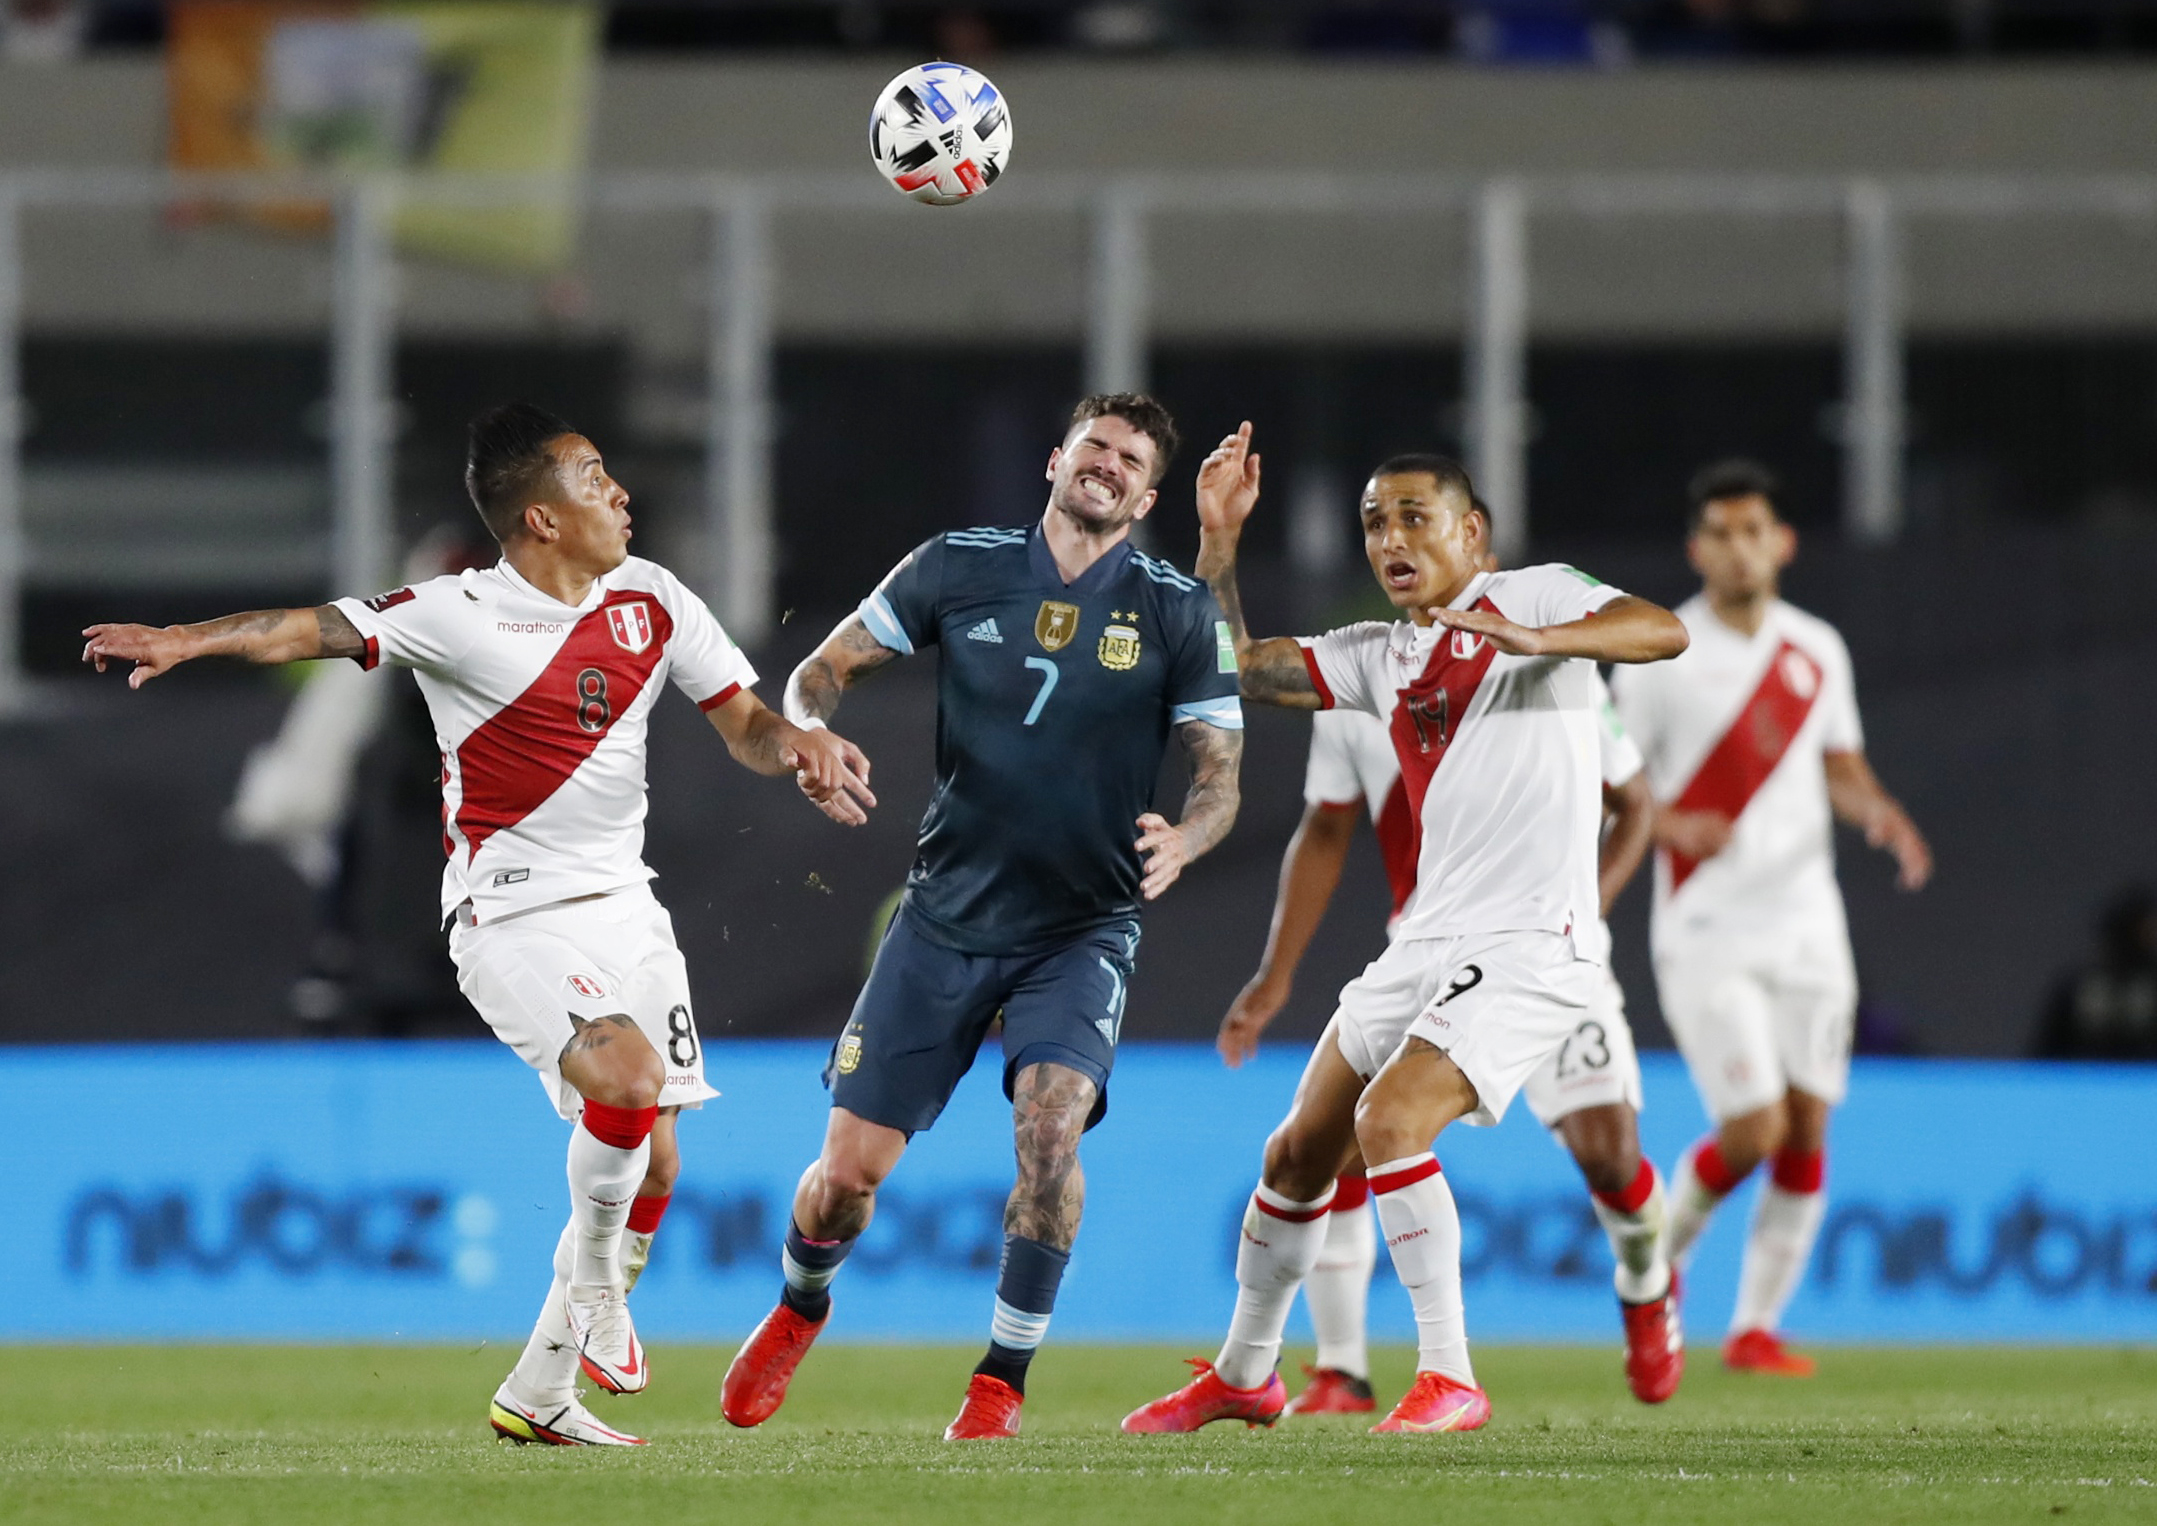 Soccer Football - World Cup - South American Qualifiers - Argentina v Peru -  Estadio Monumental, Buenos Aires, Argentina - October 14, 2021 Peru's Christian Cueva and Yoshimar Yotun in action with Argentina's Rodrigo De Paul REUTERS/Agustin Marcarian